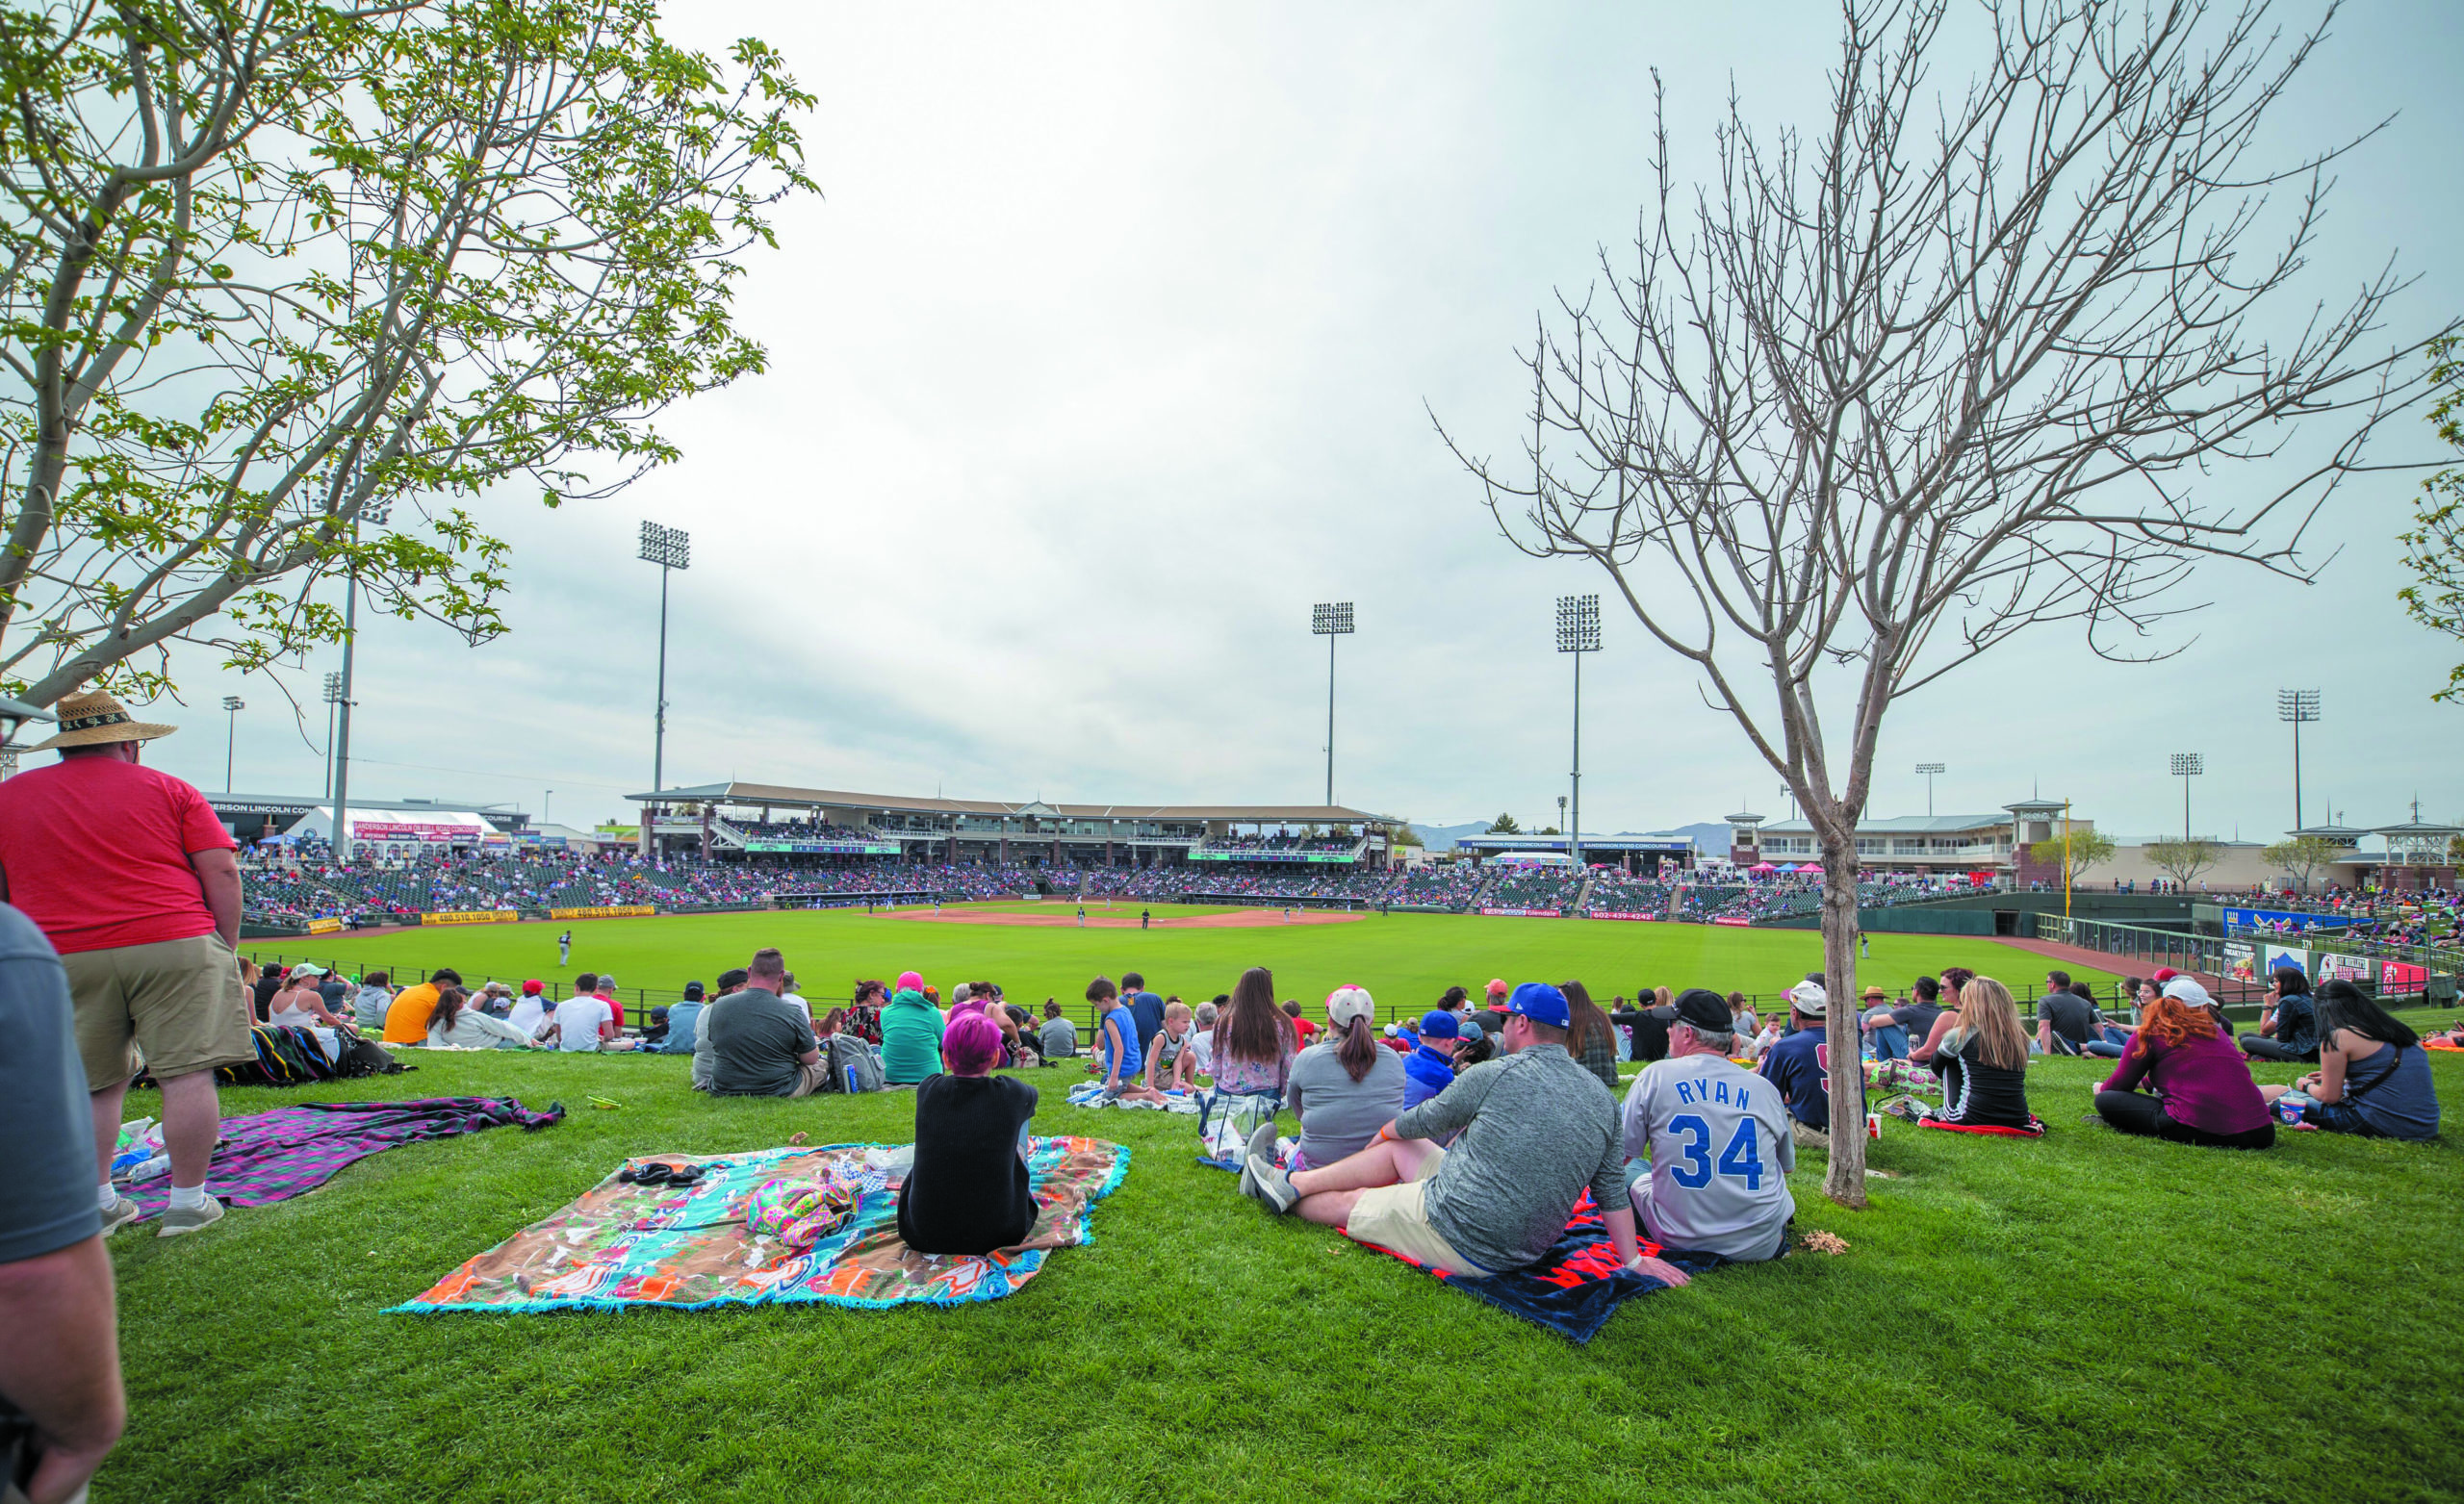 During normal years, fans fill Surprise Stadium and other facilities in the Phoenix metropolitan area during spring training. Photo courtesy of the City of Surprise.